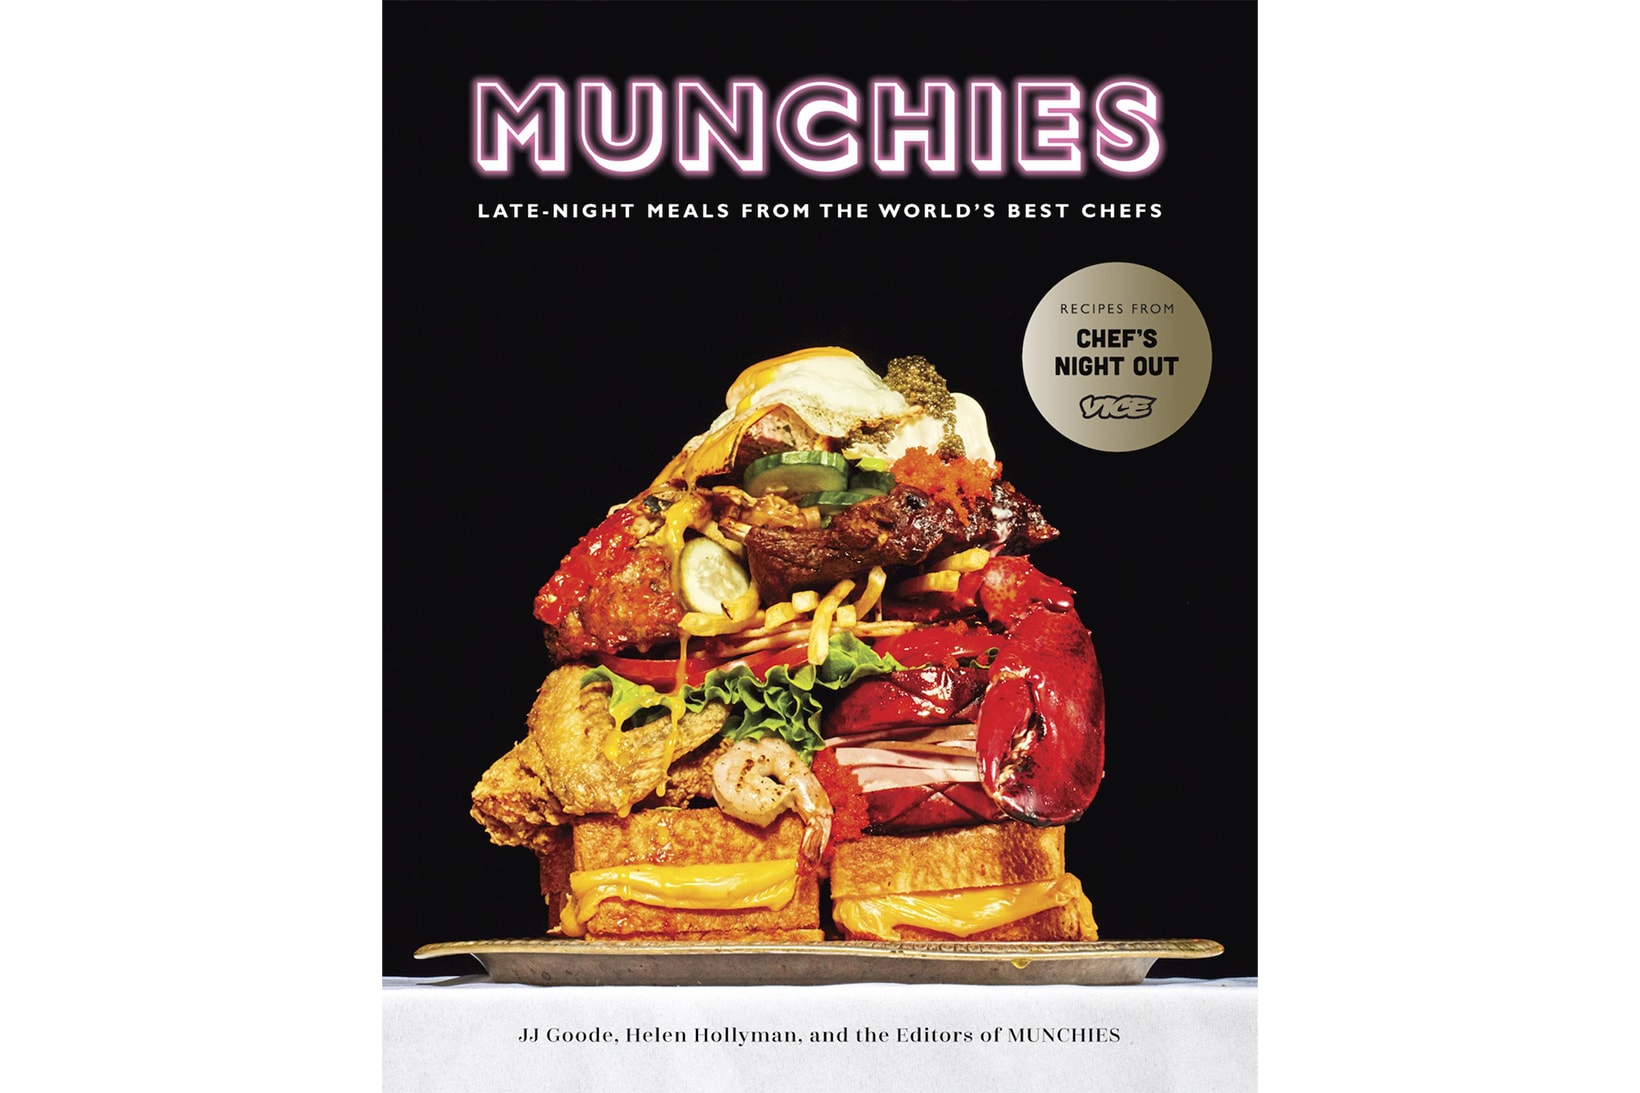 MUNCHIES Late Night Meals from the Worlds Best Chefs Cookbook